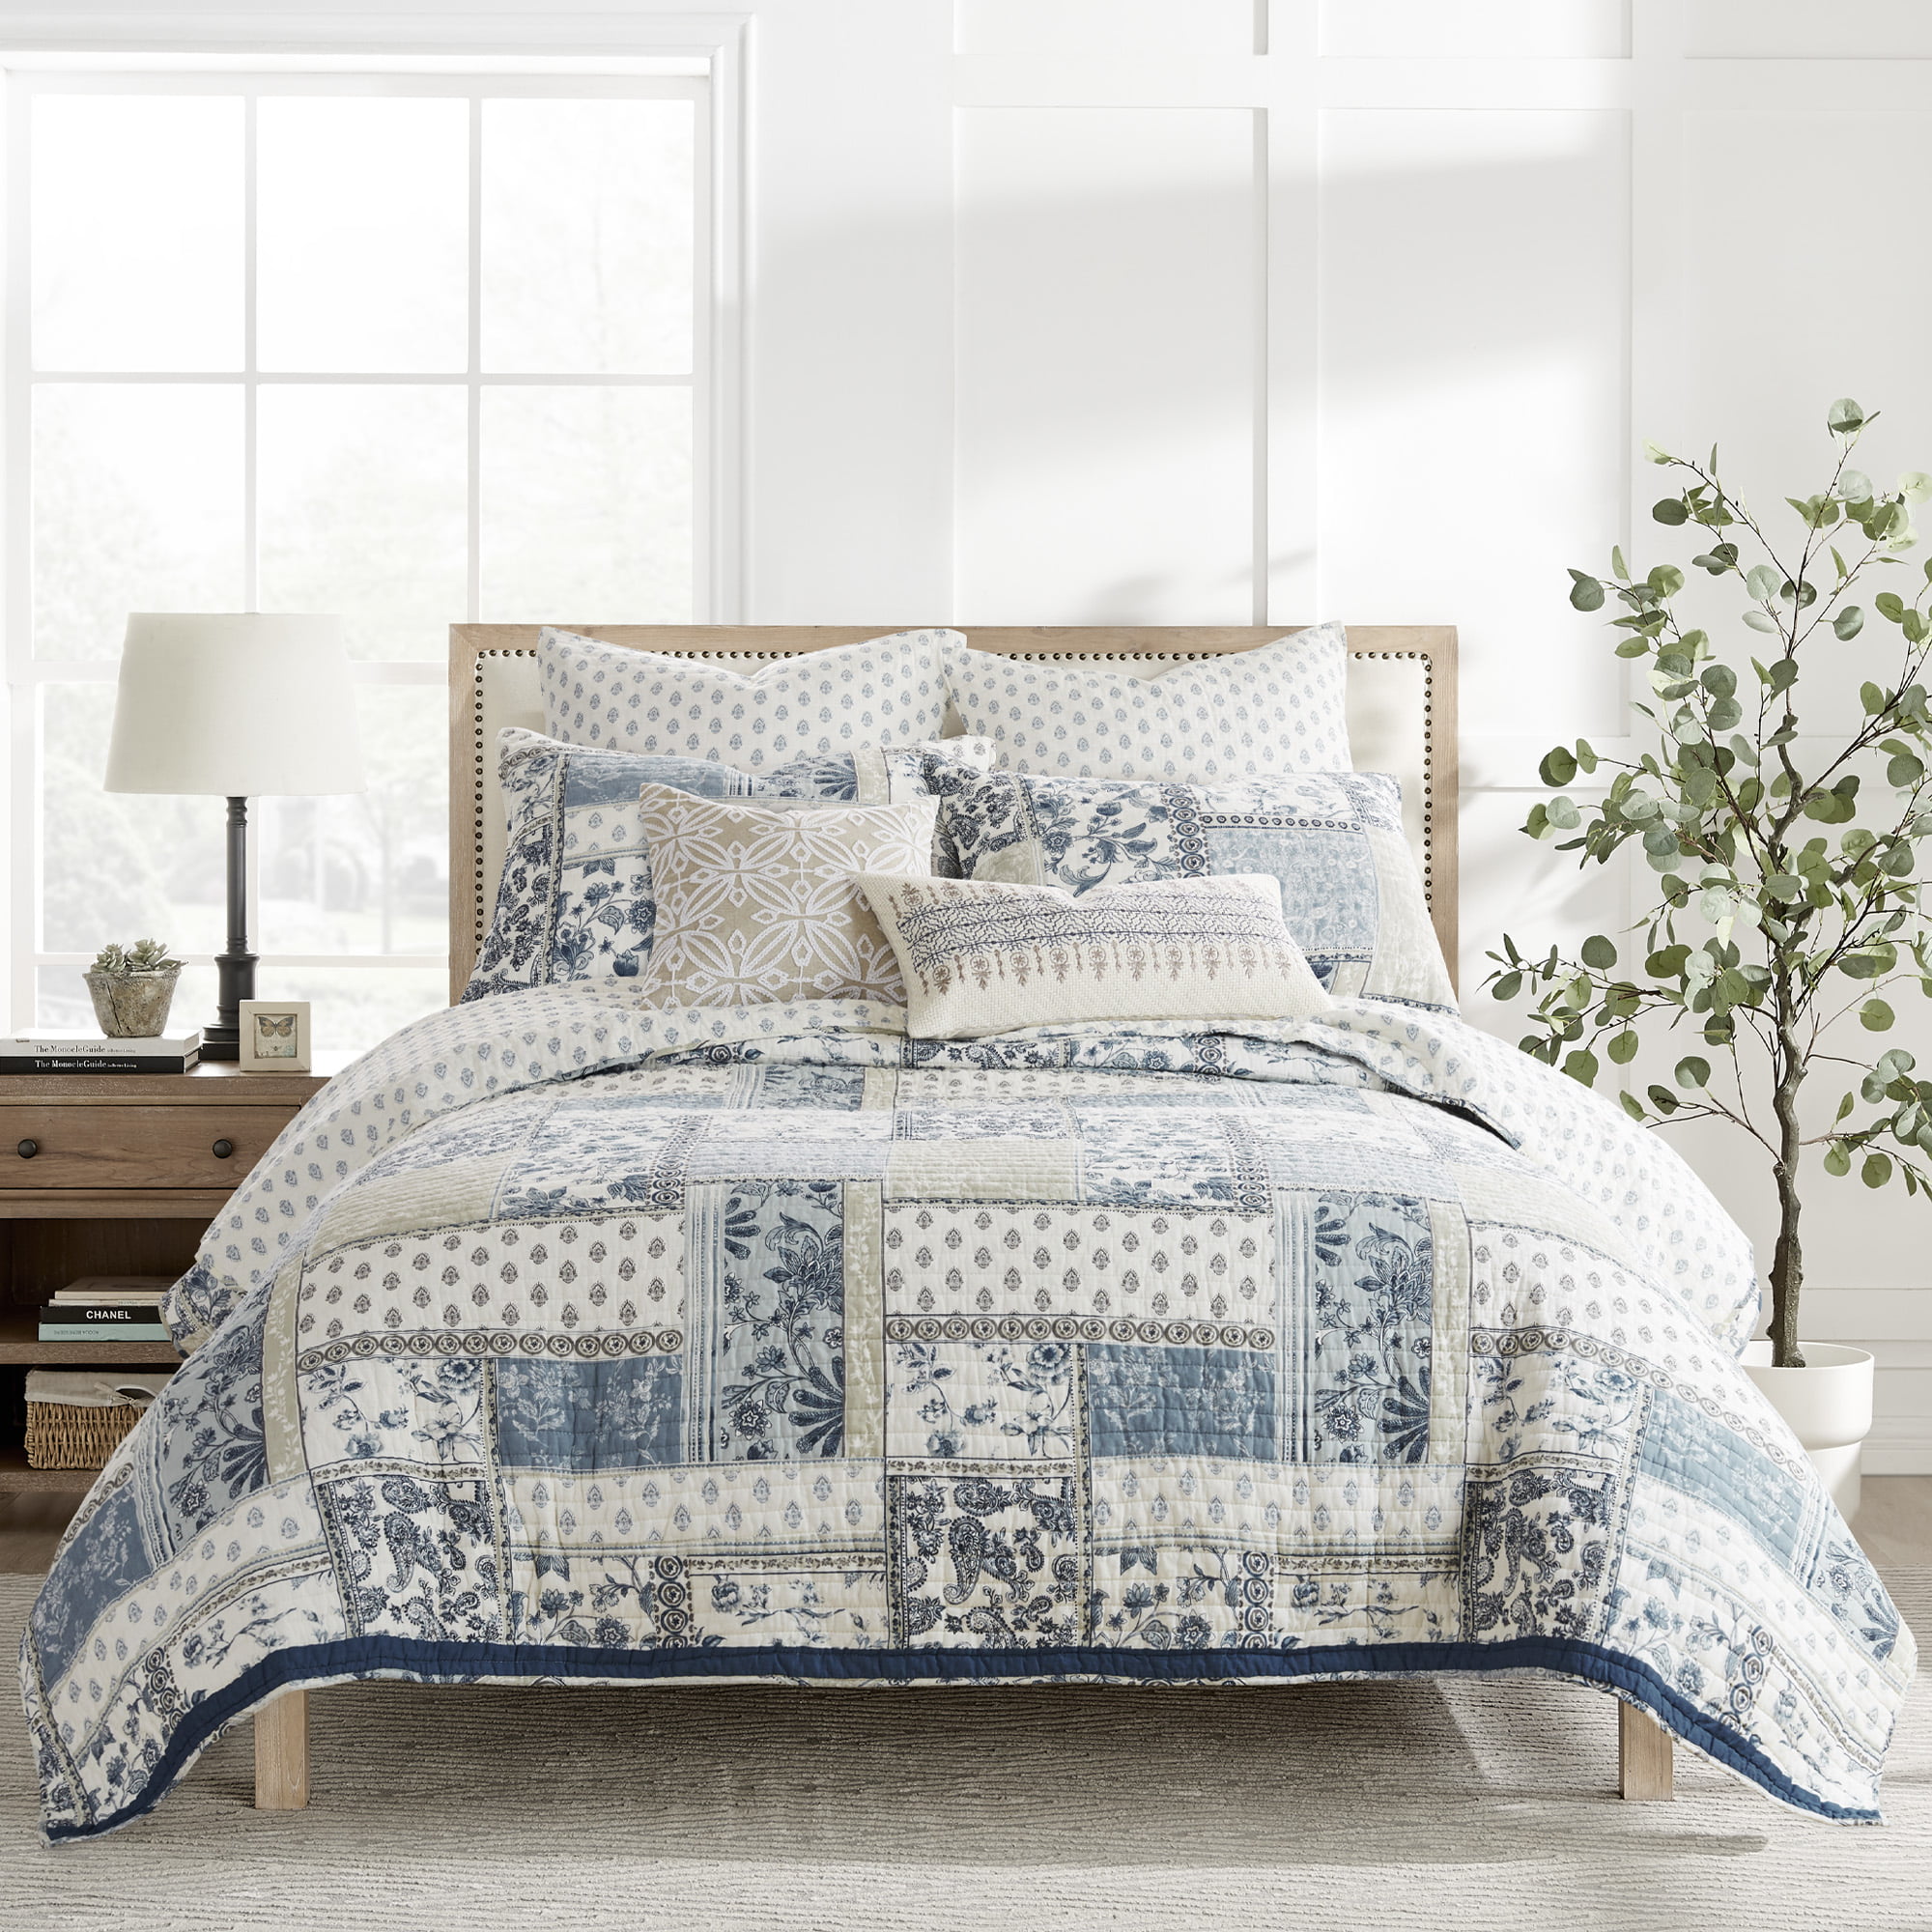 Levtex Home Aliza Quilt Set with Shams, Blue, King